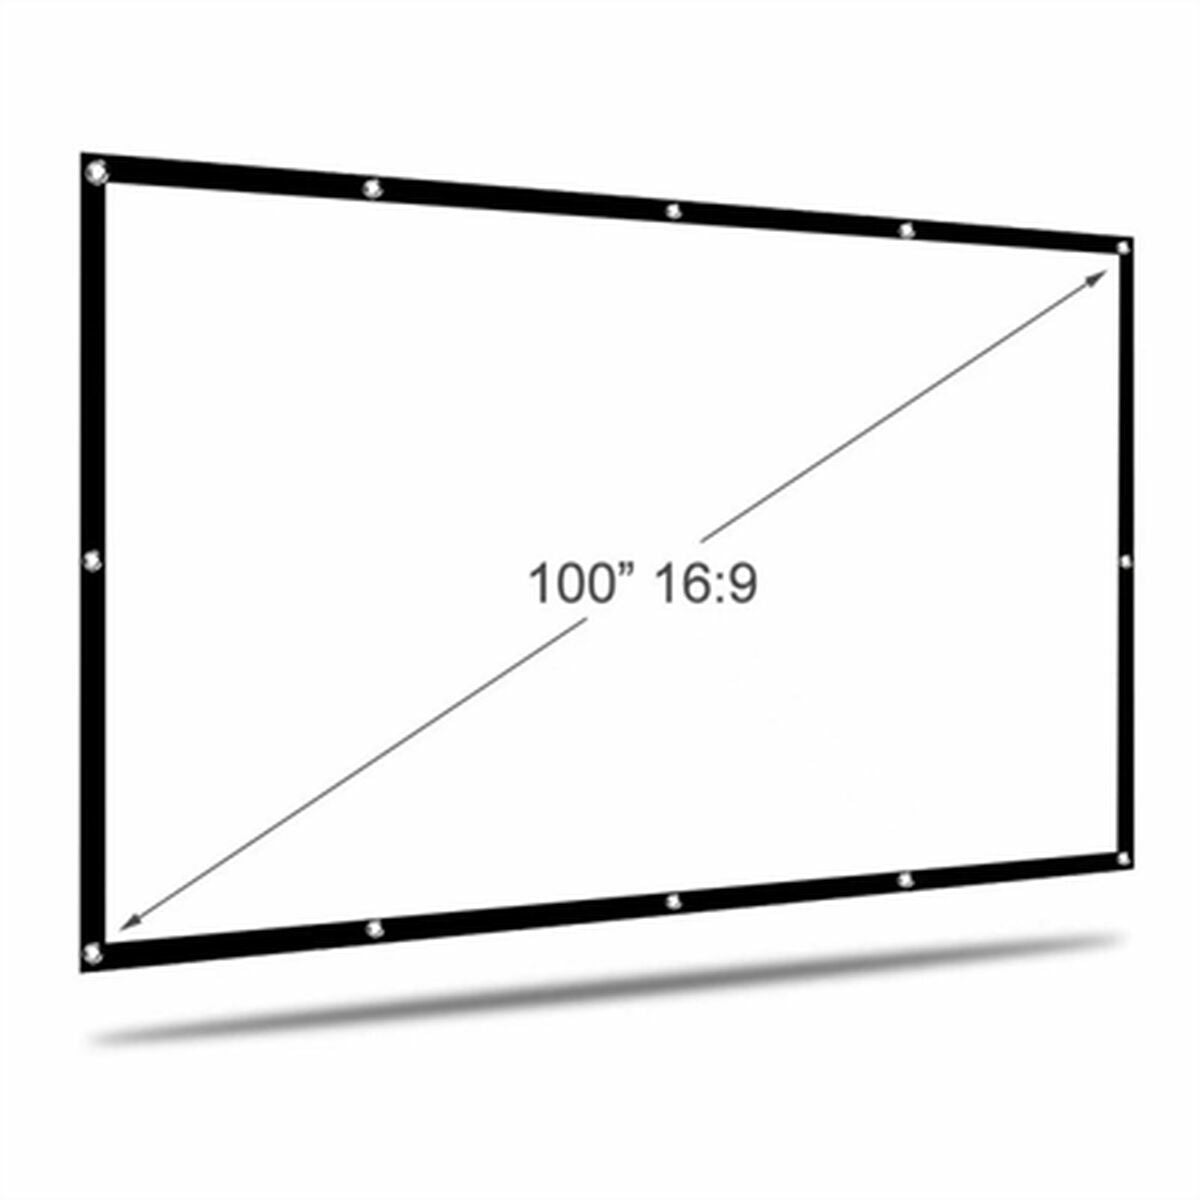 Projection Screen iggual IGG318133 100", iggual, Electronics, TV, Video and home cinema, projection-screen-iggual-igg318133-101, Brand_iggual, category-reference-2609, category-reference-2642, category-reference-2852, category-reference-t-18805, category-reference-t-19653, category-reference-t-19921, category-reference-t-21391, category-reference-t-25697, cinema and television, computers / peripherals, Condition_NEW, entertainment, office, Price_20 - 50, RiotNook